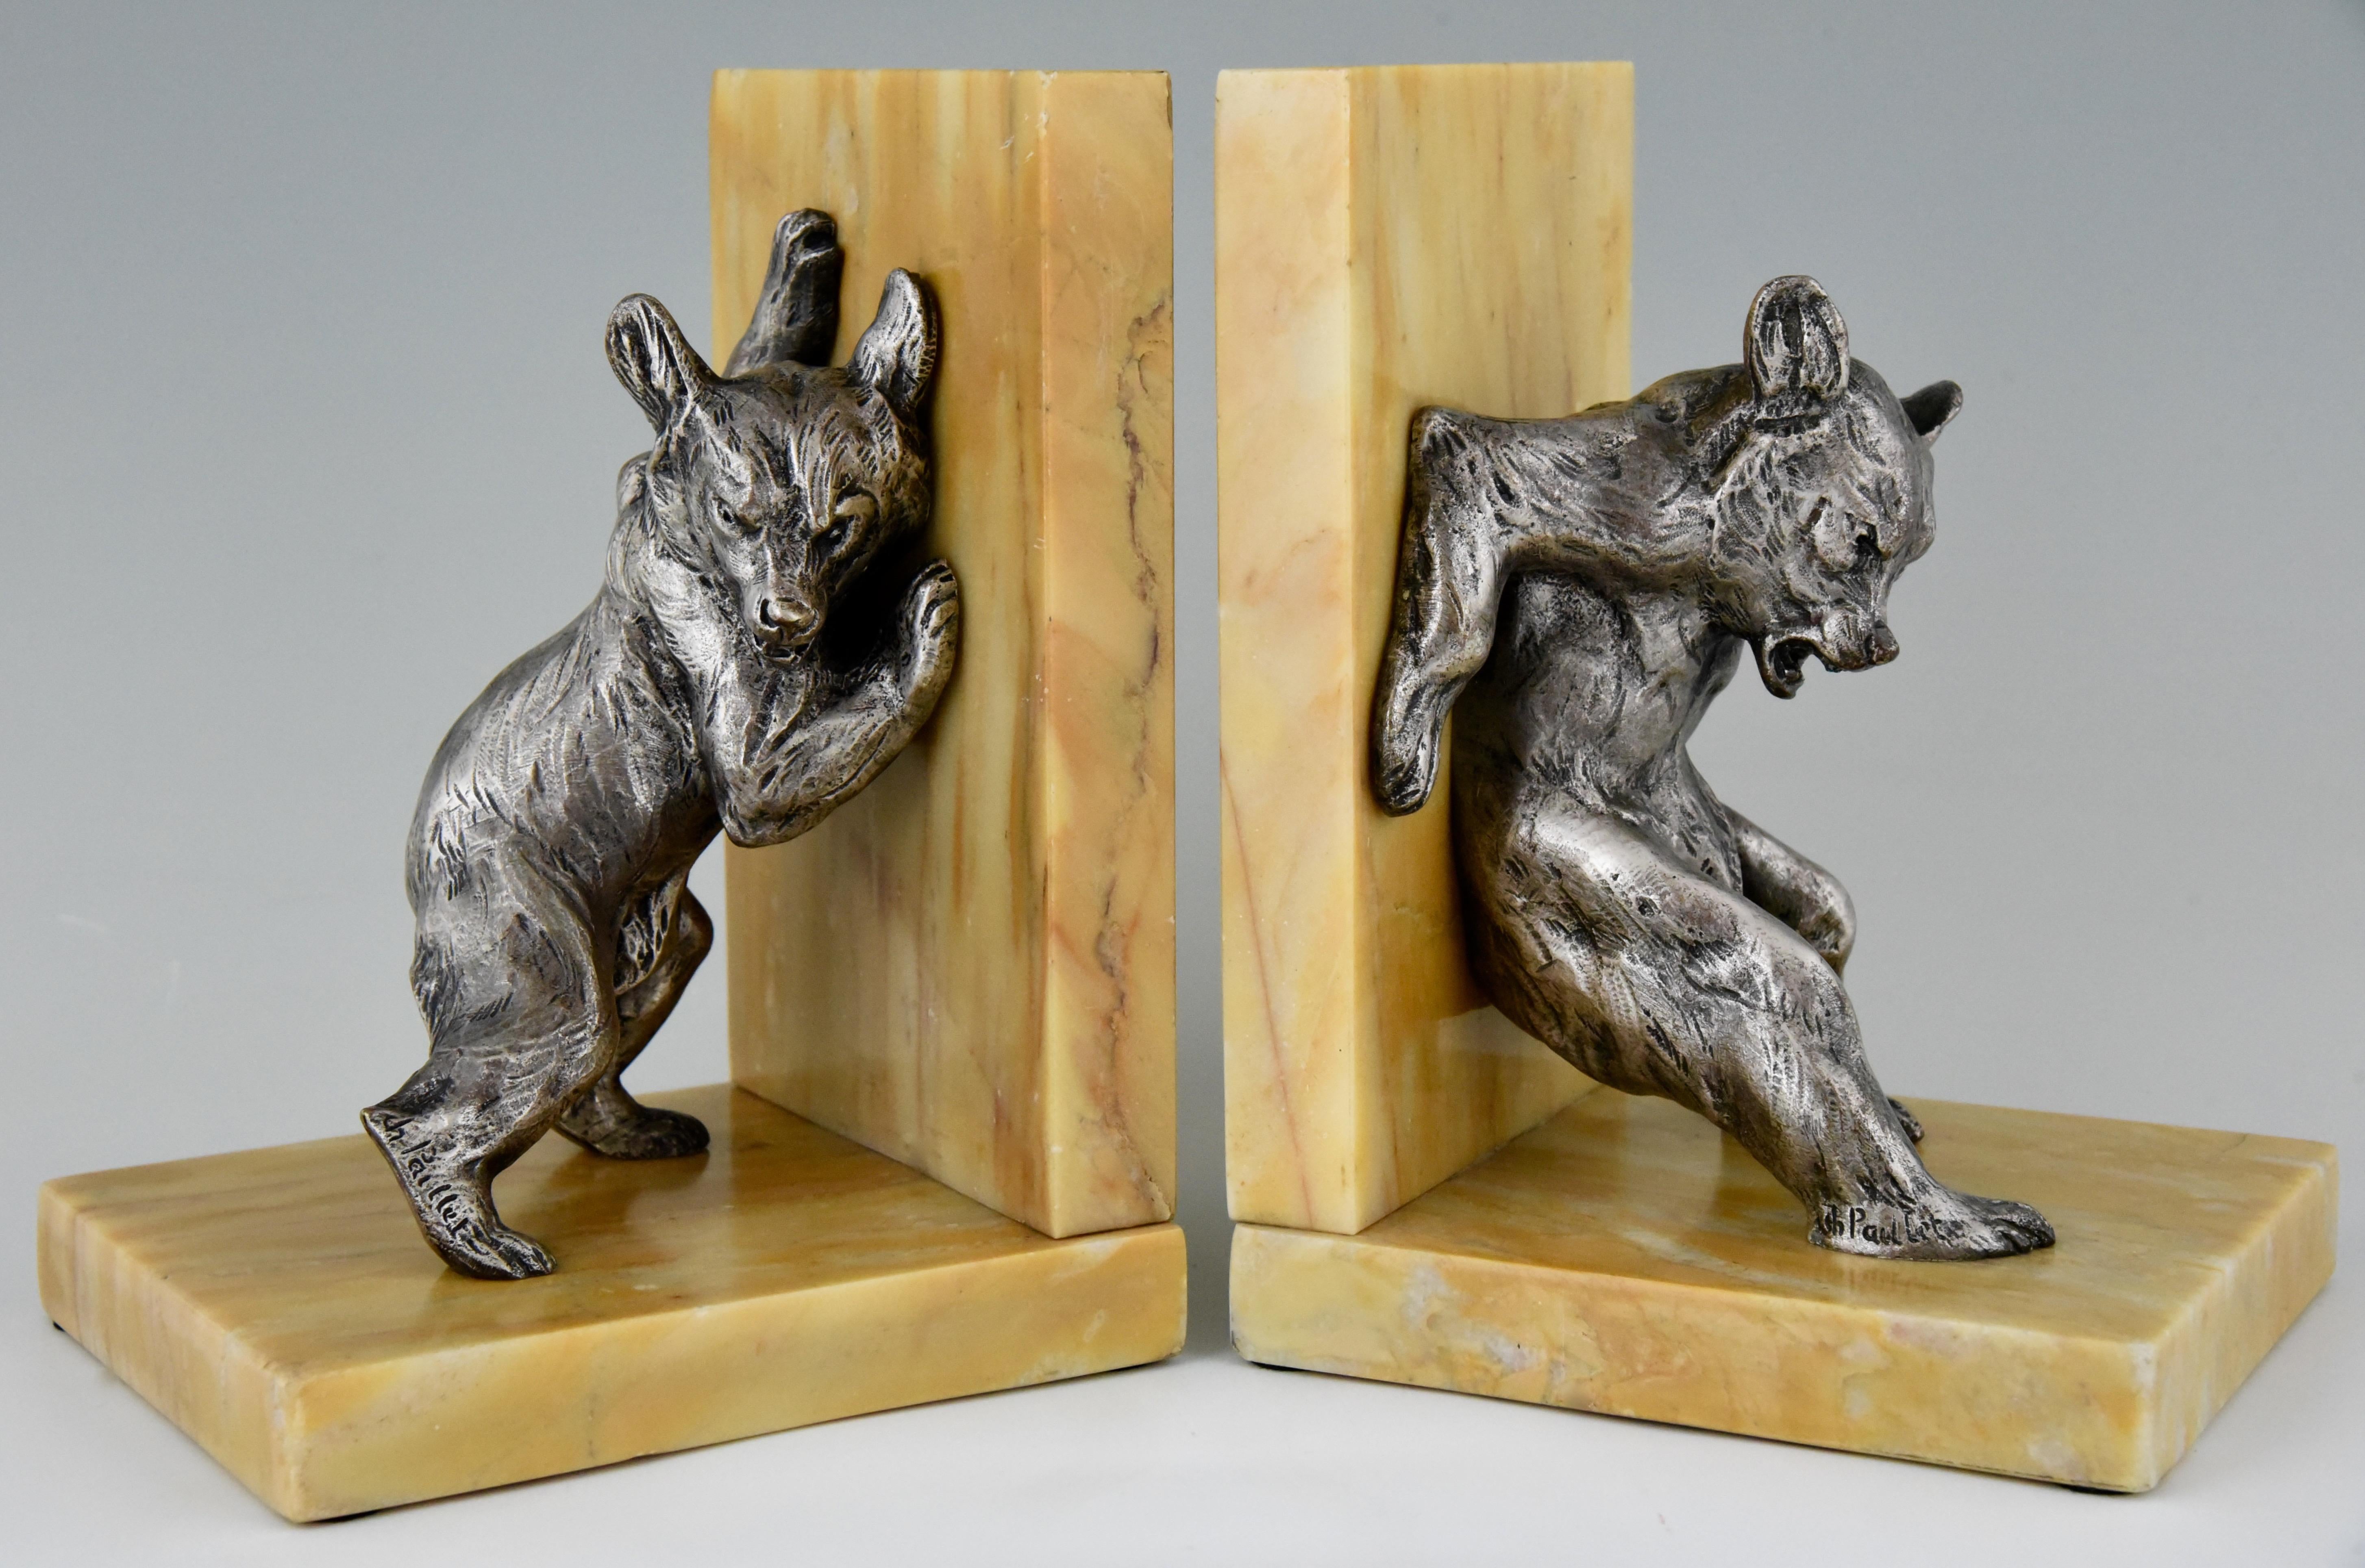 Lovely pair of Art Deco bronze bookends with bear cubs playing.
Signed by artist Charles Paillet. Mounted on beautiful yellow marbles bases, France, circa 1920.